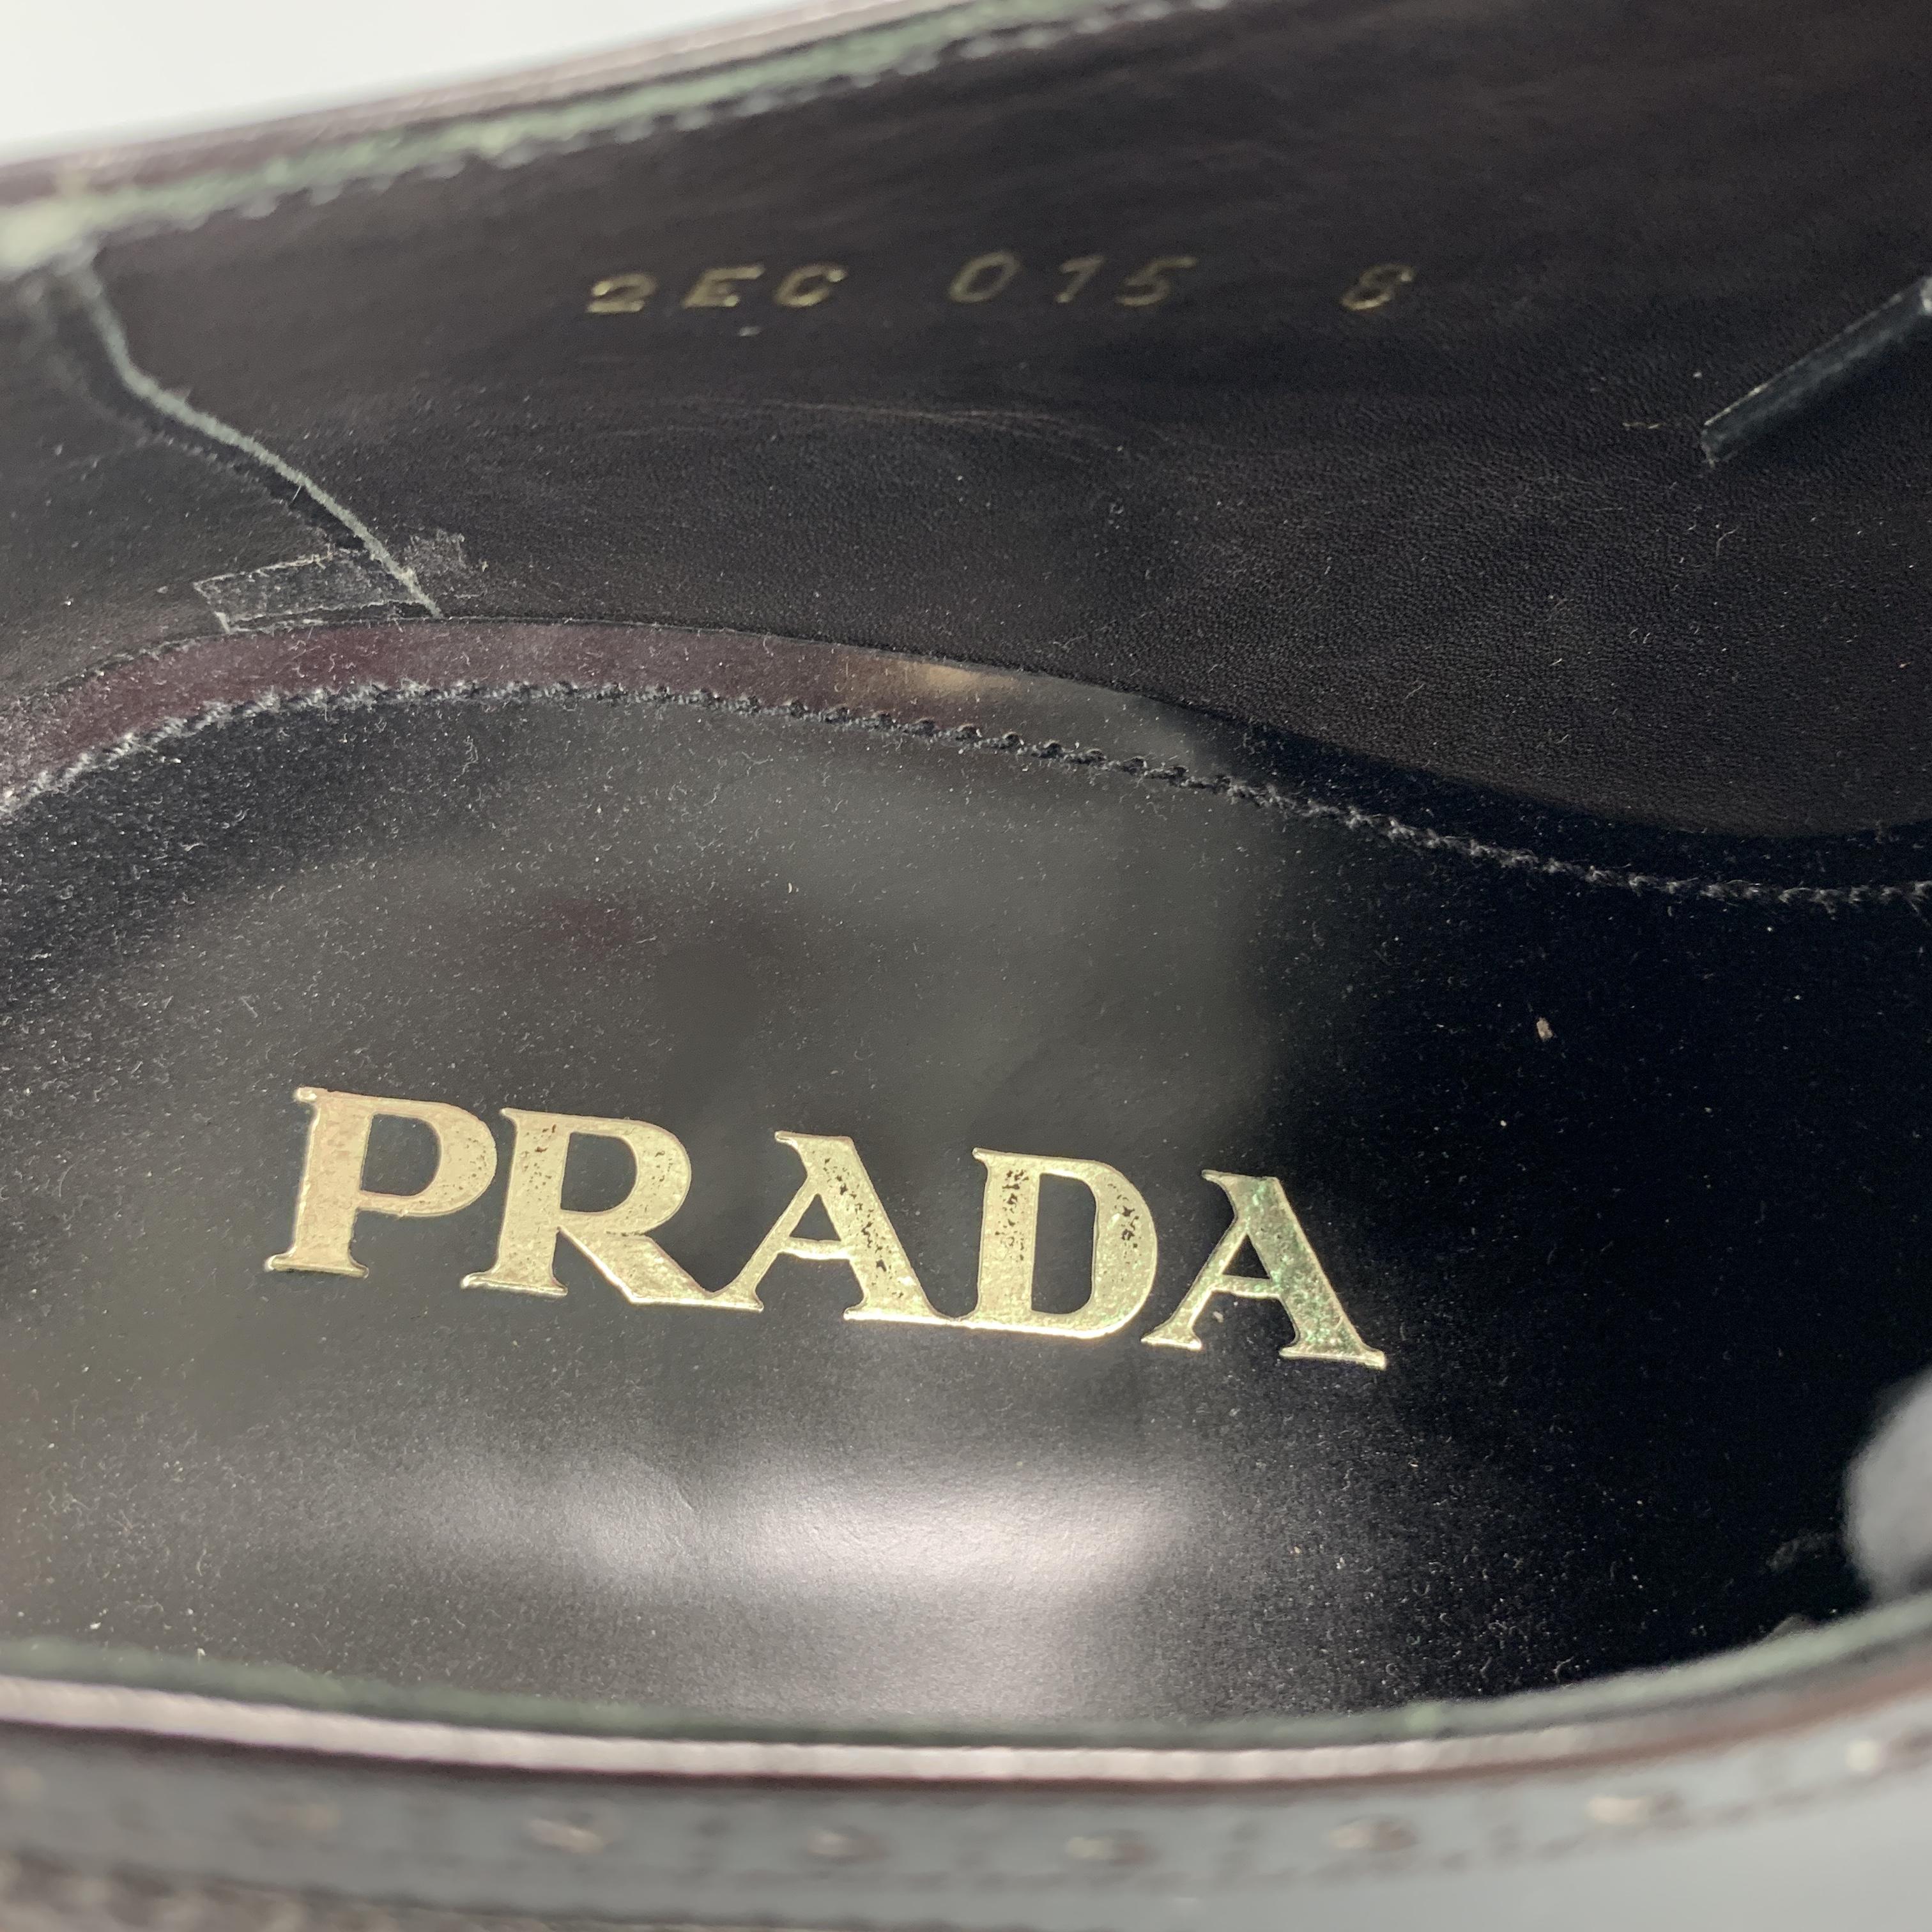 Men's Iconic Spring Summer 2011 Collection PRADA brogues come in burgundy and tan brow